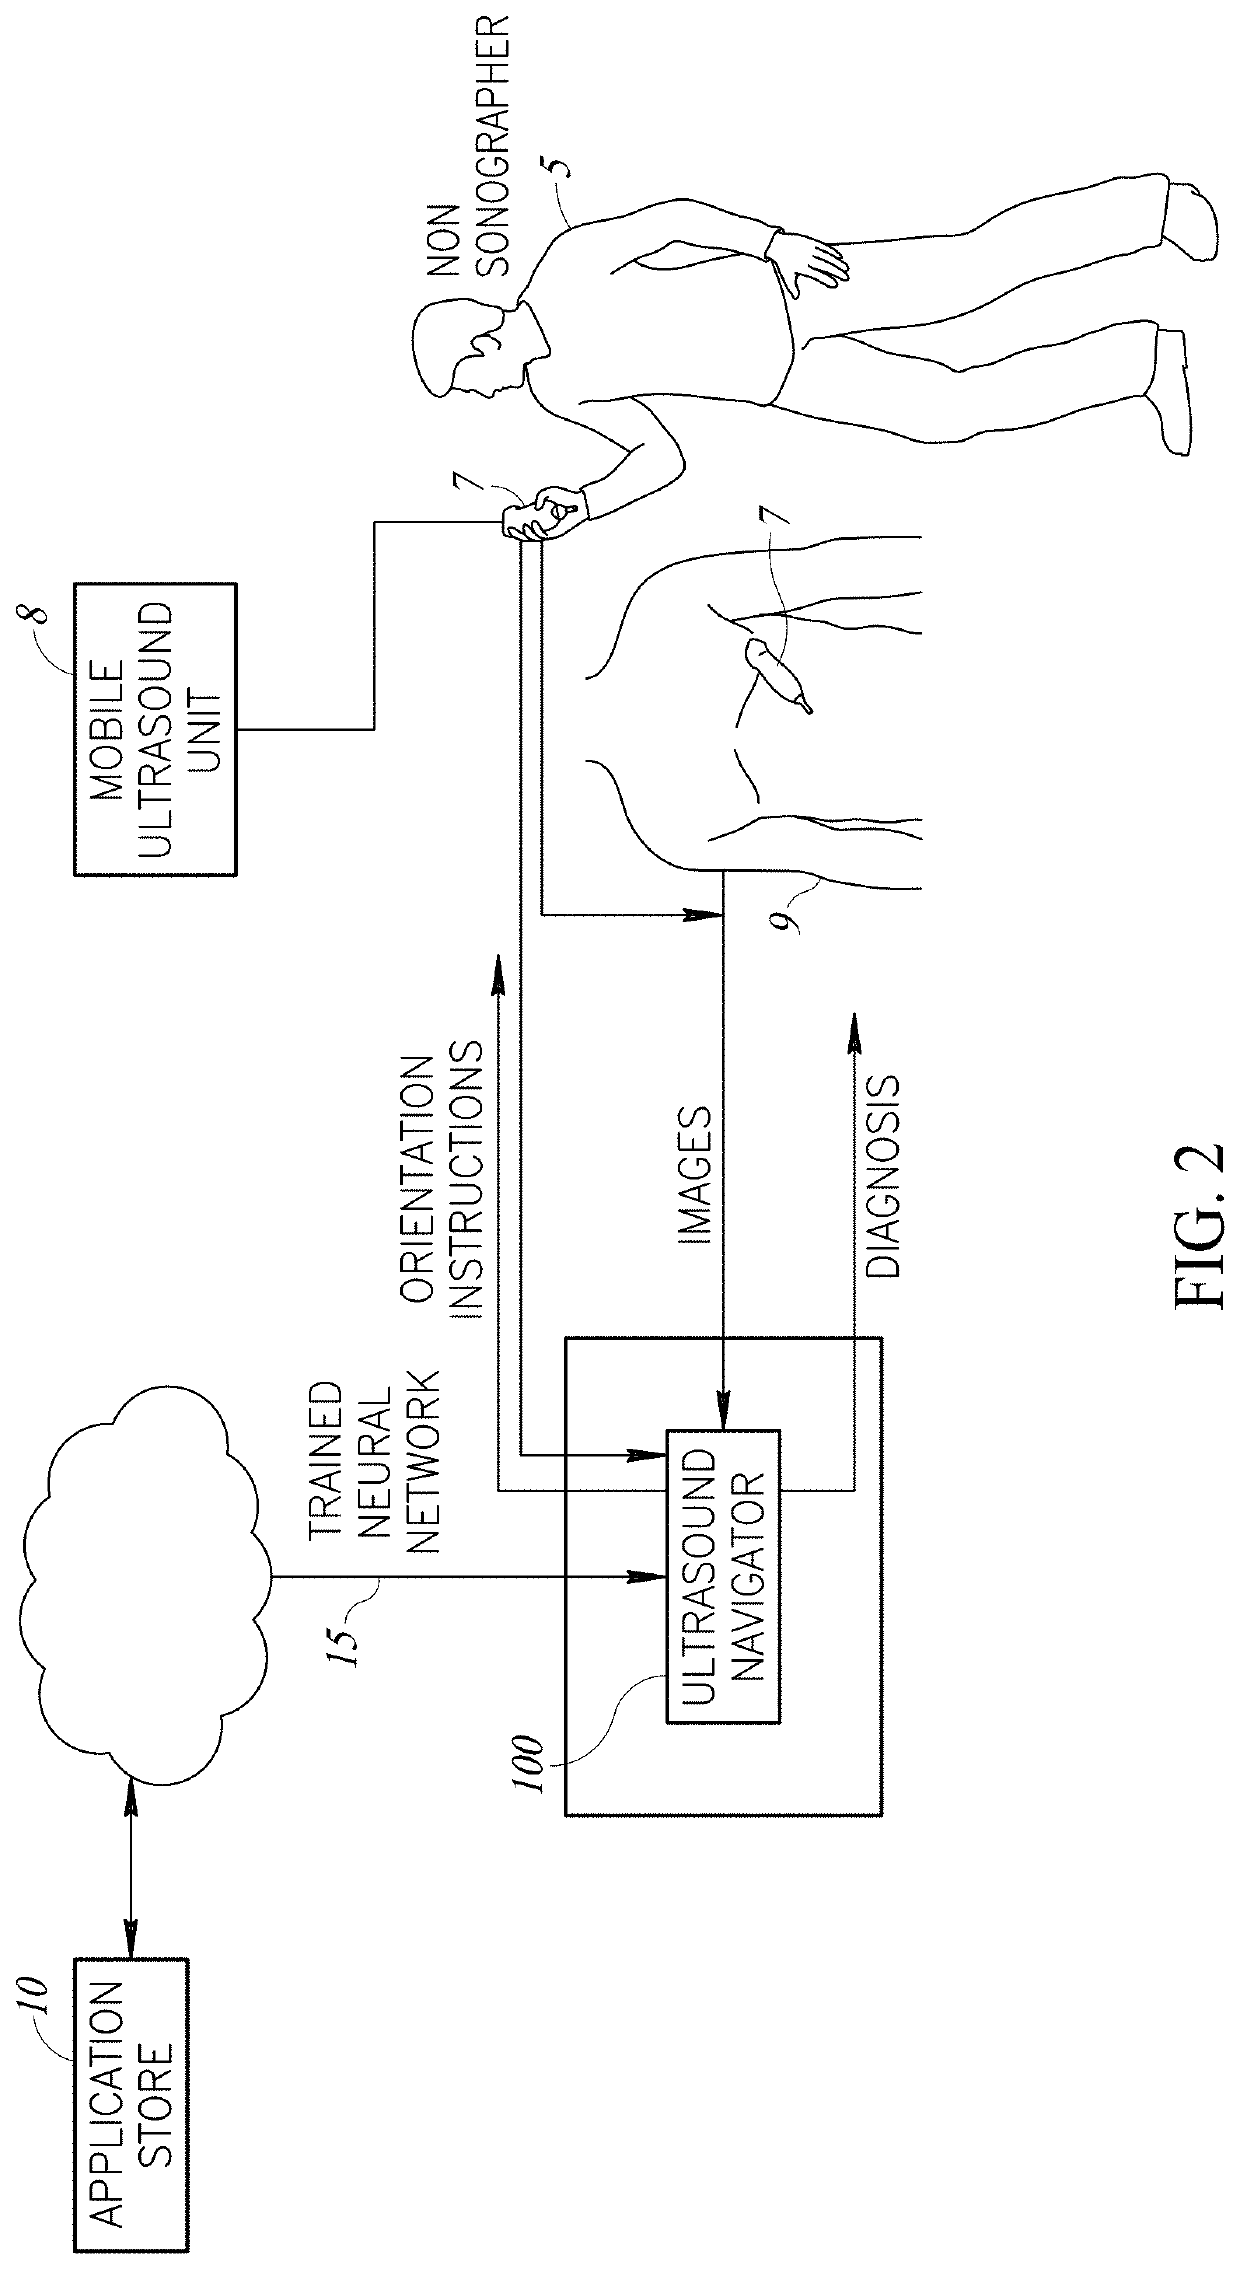 System and method for orientating capture of ultrasound images